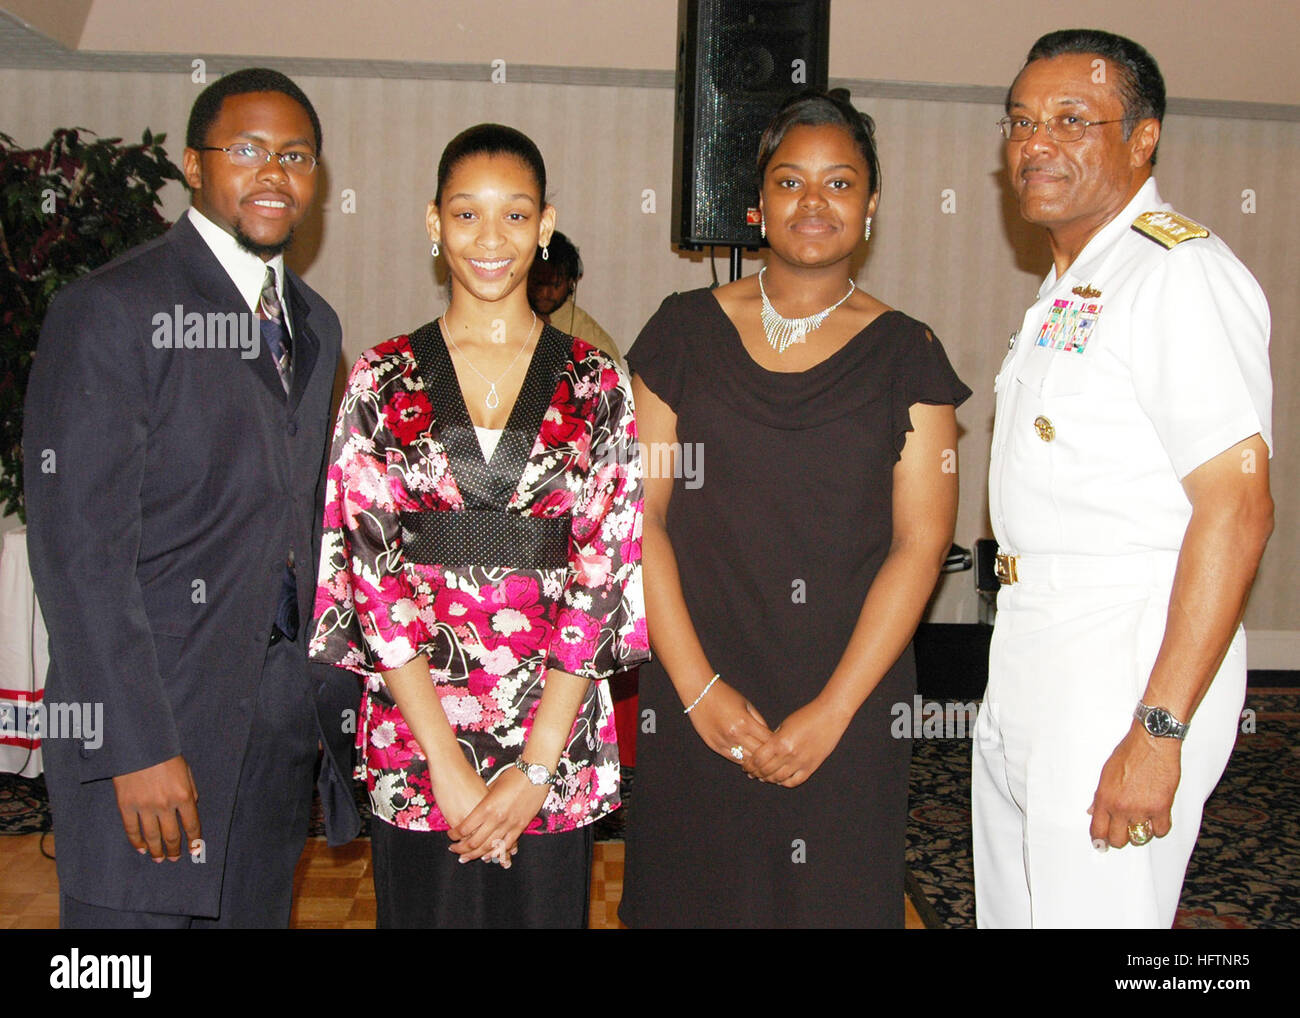 070512-N-2456S-125  NORFOLK, Va (May 12, 2007) - Scholarship recipients (from the left) Gerald M. Fleming II, a Maury High School senior, Sandra Beale and Clarissa Epps, both Lakeland High School seniors, stand with Rear Adm. D.C. Curtis, commander, Naval Surface Force, U.S. Atlantic Fleet, after he presented them with the Vice Admiral Samuel L. Gravely Scholarship. The scholarships were awarded at a banquet hosted by the National Naval Officer's Association (NNOA) Tidewater Chapter at Naval Station Norfolk's Breezy Point Officers Club. U.S. Navy photo by Mass Communication Specialist Seaman J Stock Photo